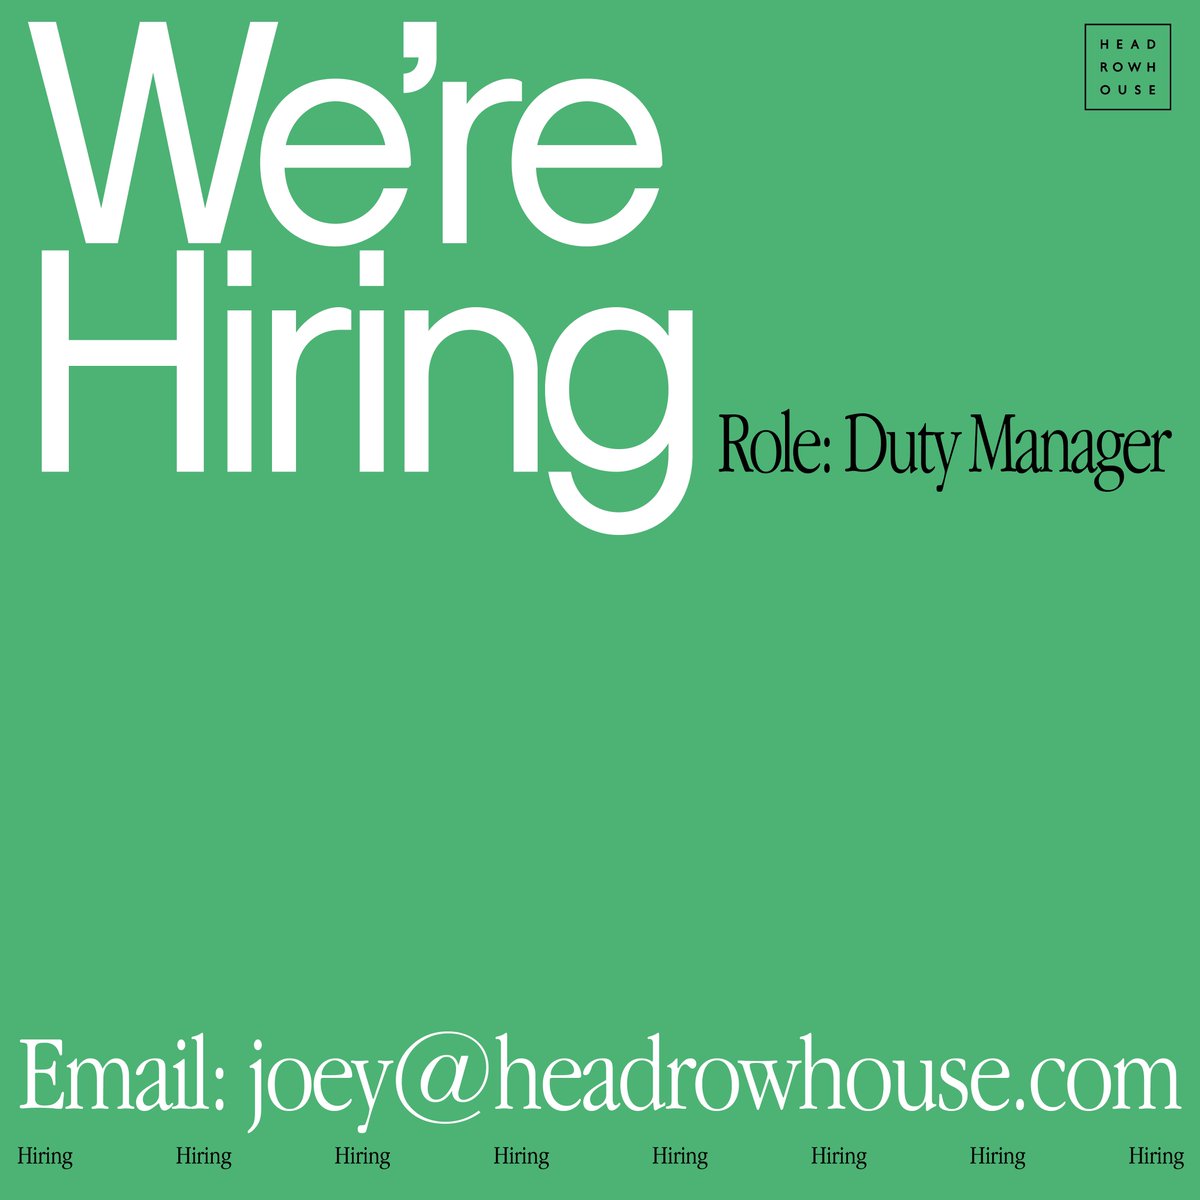 We are Hiring! We are looking for a Duty manager to join the team at Headrow. Previous experience and a passion for working in a busy customer service is essential. To apply and for more information, please email Joey@headrowhouse.com